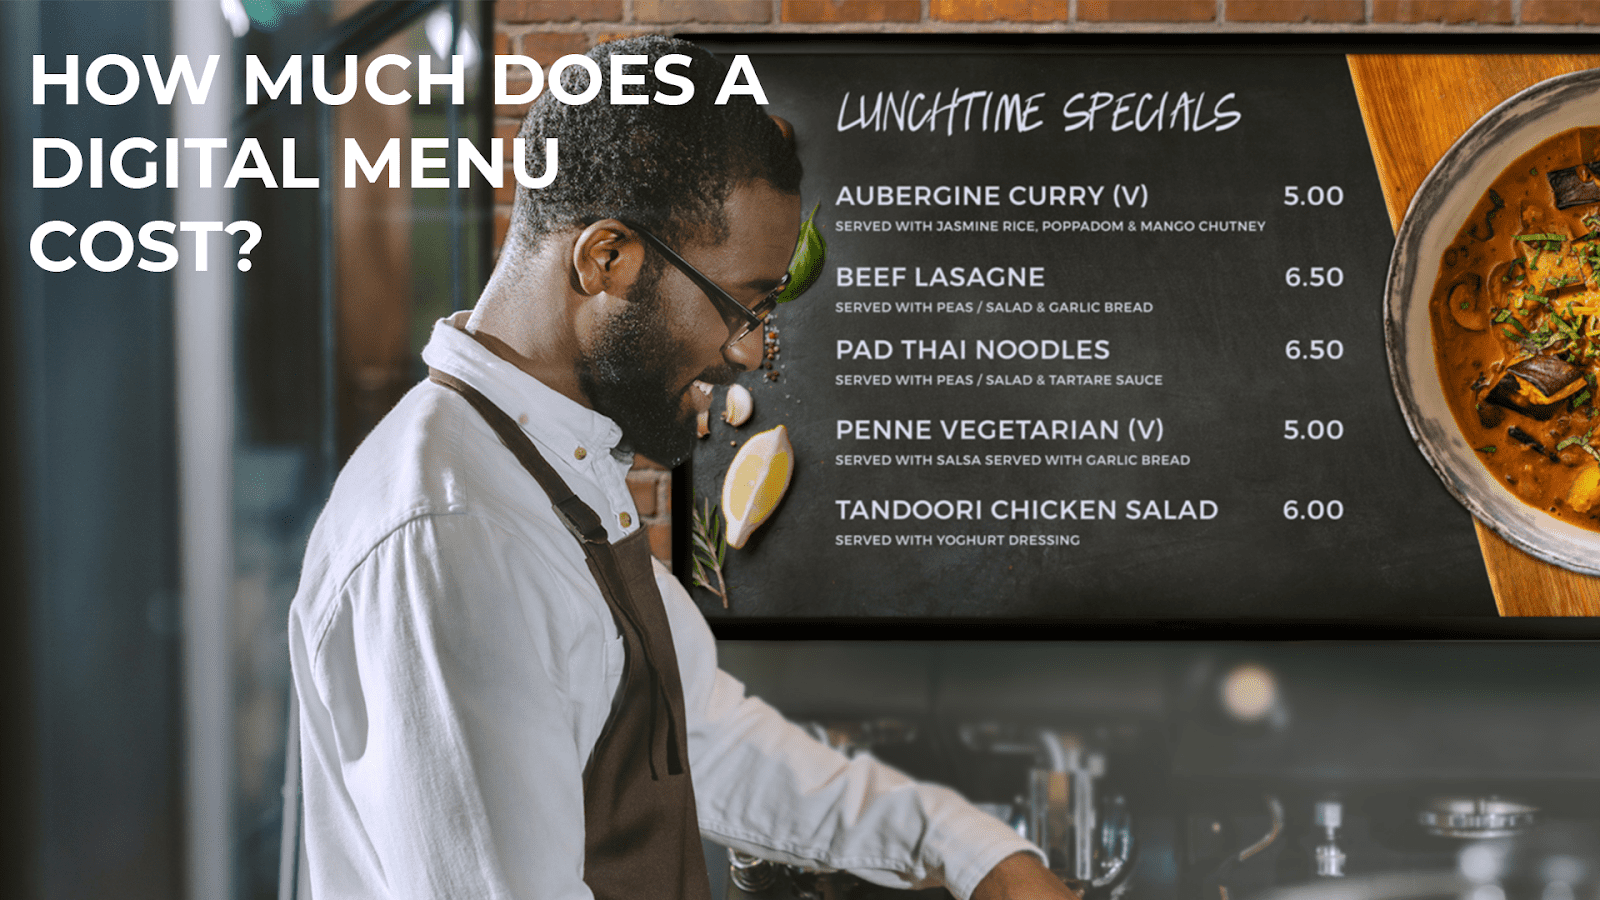 How much does digital menu cost